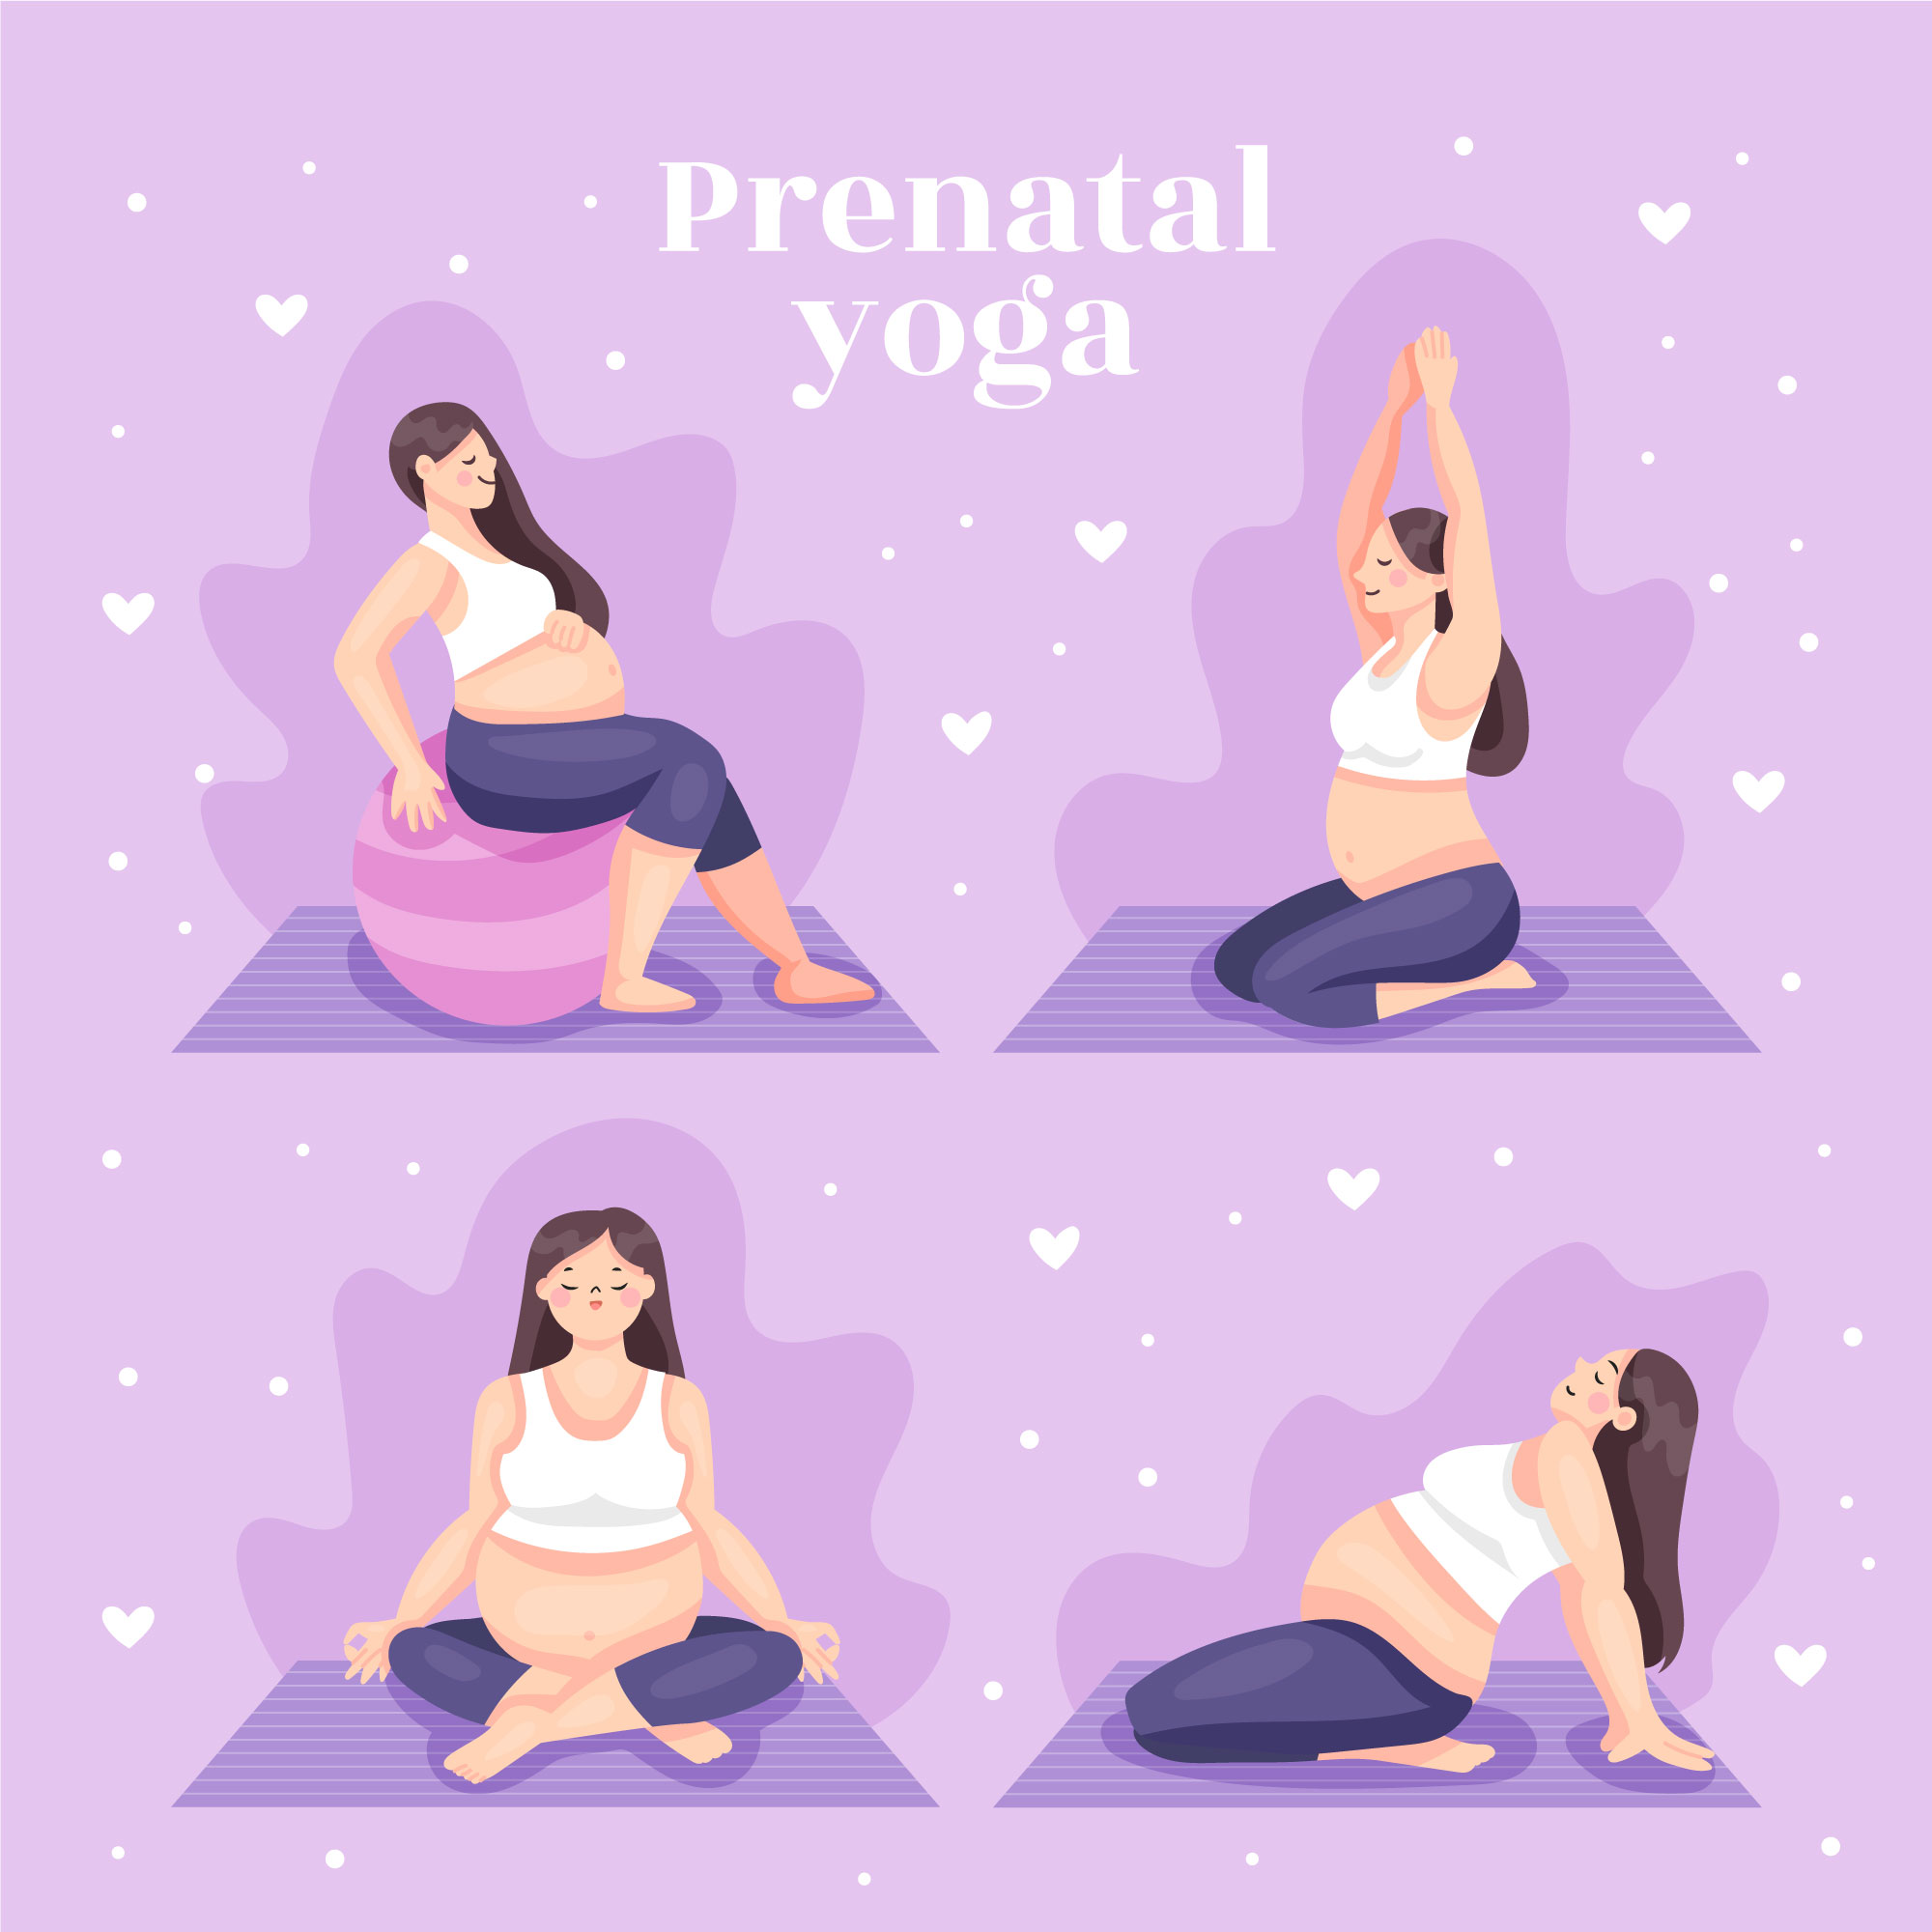 Yoga to improve reproductive, sexual health - Yes Punjab - Latest News from  Punjab, India & World